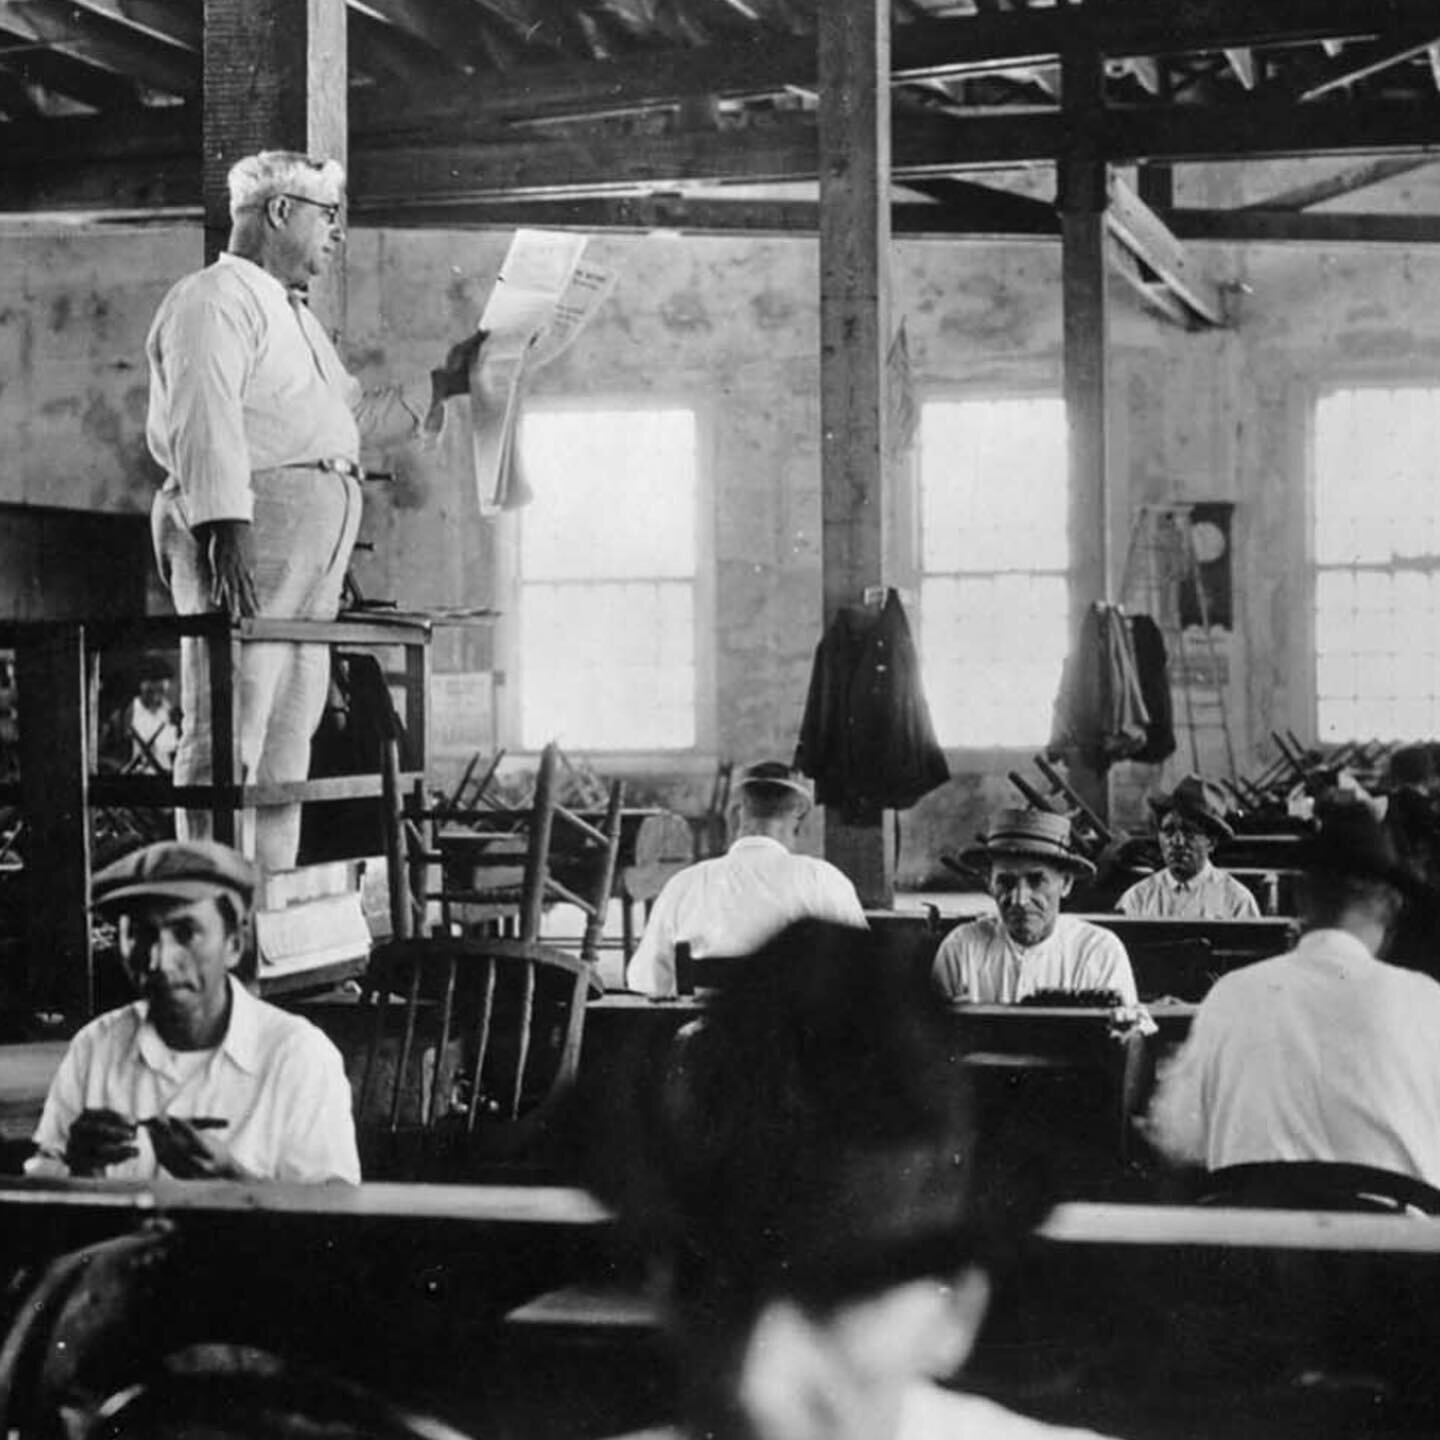 The role of &ldquo;El Lector&rdquo; in cigar factories was a practice that reportedly began in Havana in 1865.

To keep their minds active and engaged during long hours of monotonous labor, workers began paying a reader, or&nbsp;lector, to read aloud